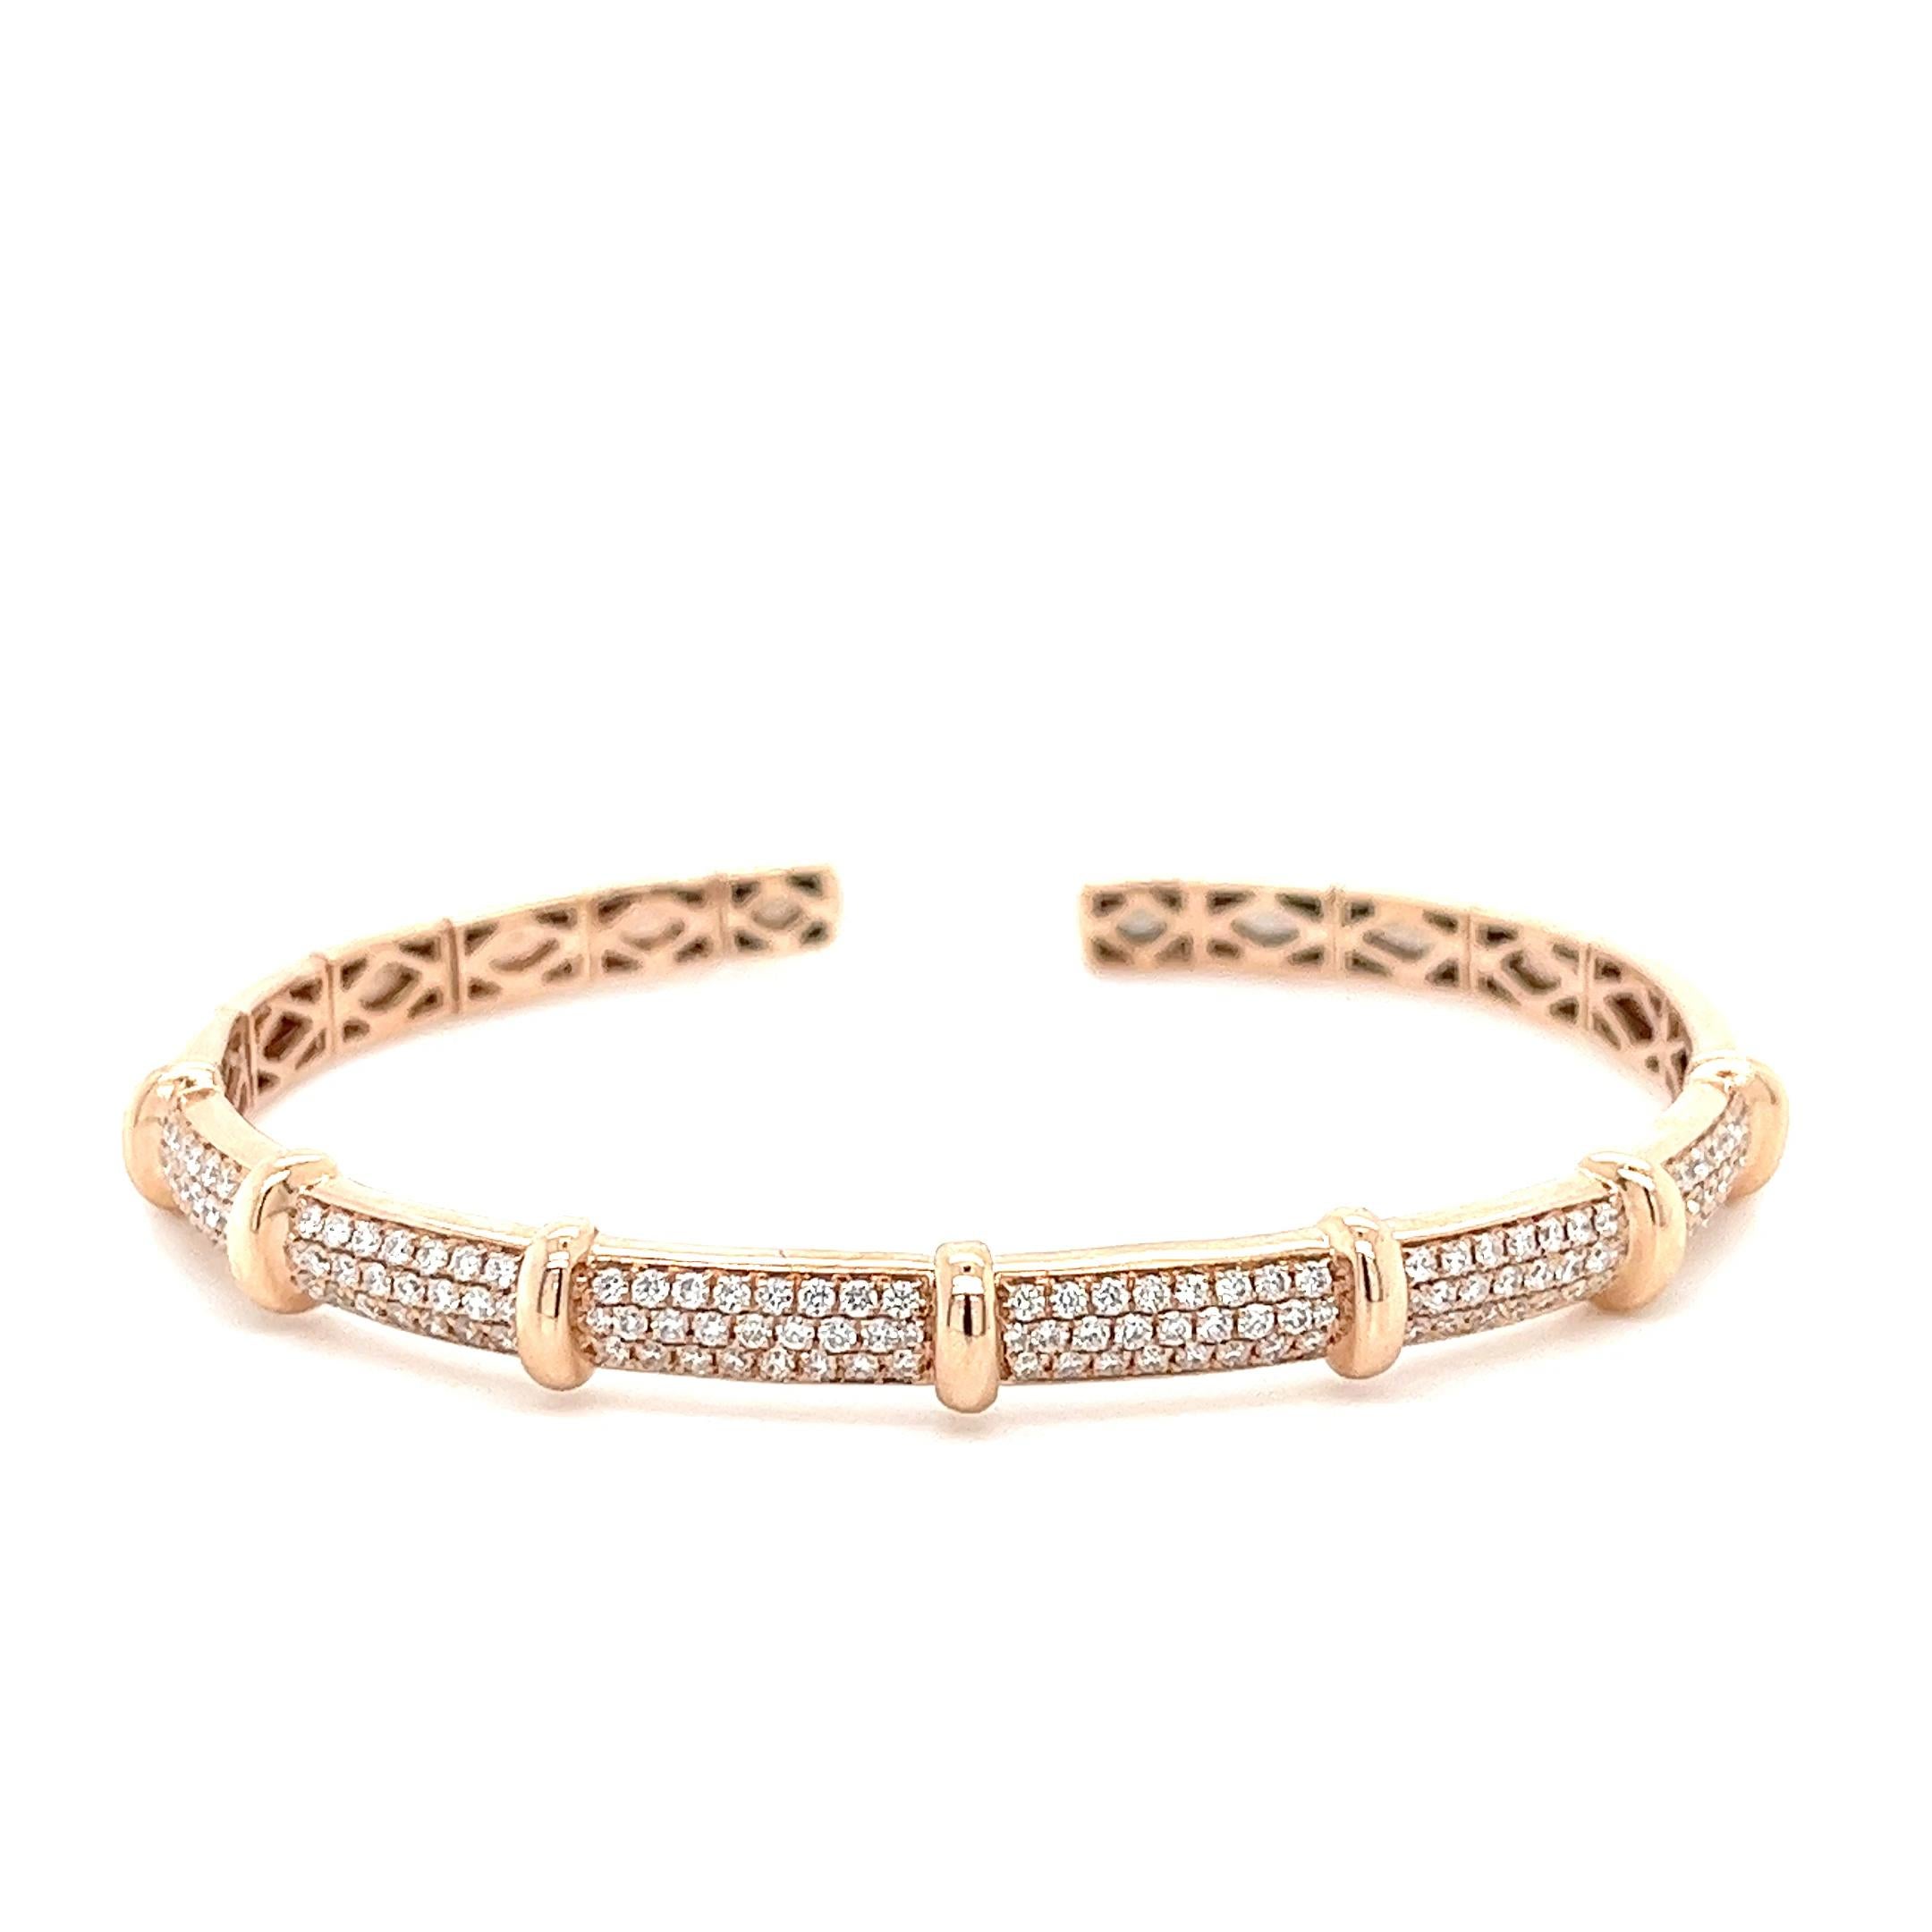 18K Rose Gold Bracelet with Diamonds

18K Rose Gold - 10.66 GM
94 Diamonds - 0.56 CT
Size - 45X55 mm

Elevate your style with the captivating beauty of this enchanting 18K Rose Gold Bracelet embellished with a mesmerizing array of 94 sparkling